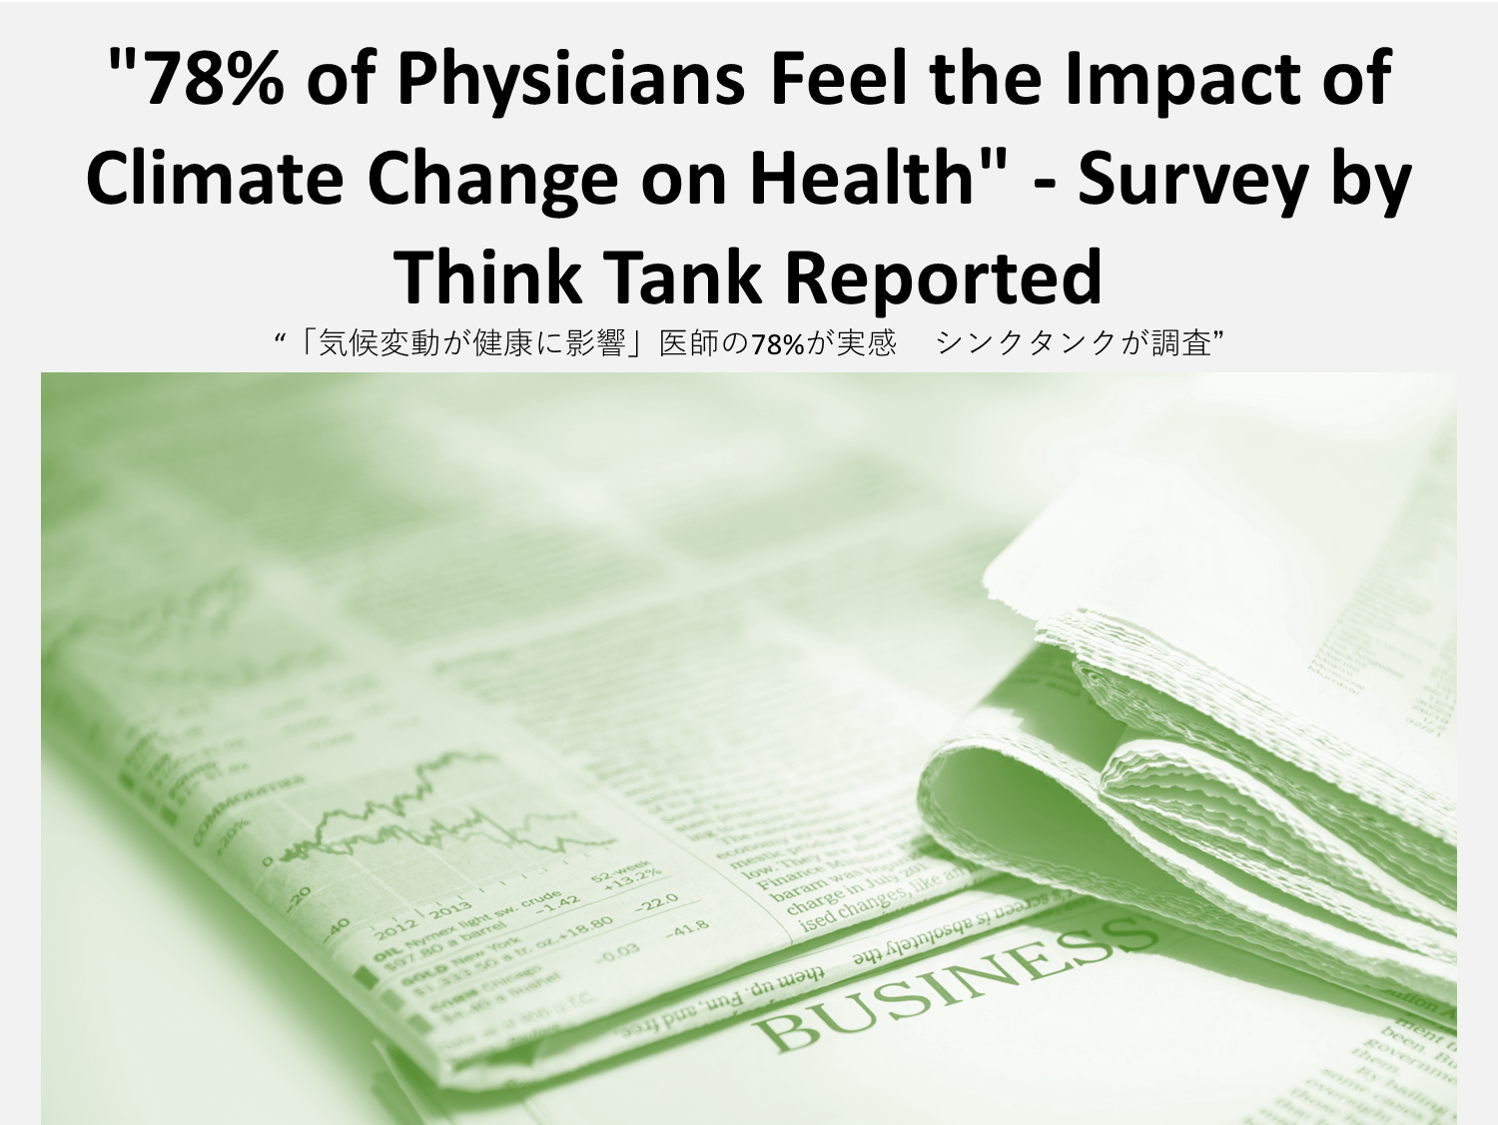 [In the Media] “78% of Physicians Feel the Impact of Climate Change on Health” – Survey by Think Tank (December 6,9,22, 2023; Mainichi Newspaper, KYODO NEWS, Jiji Medical)